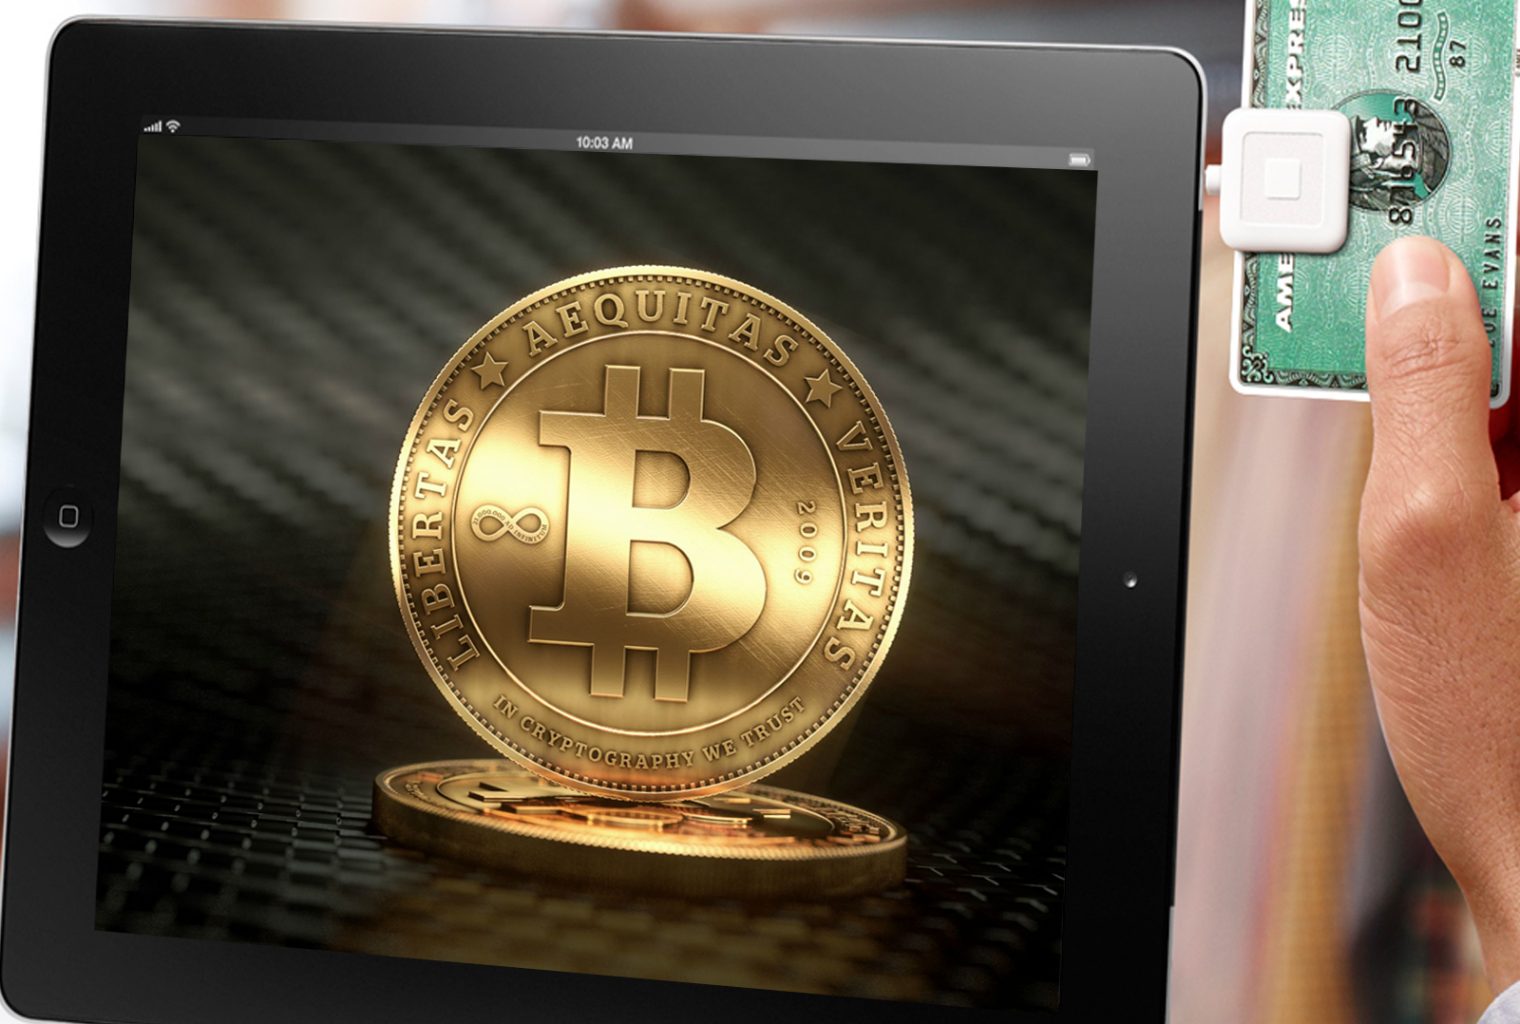 Square Cash App Users Trial New Buy And Sell Bitcoin Feature - 